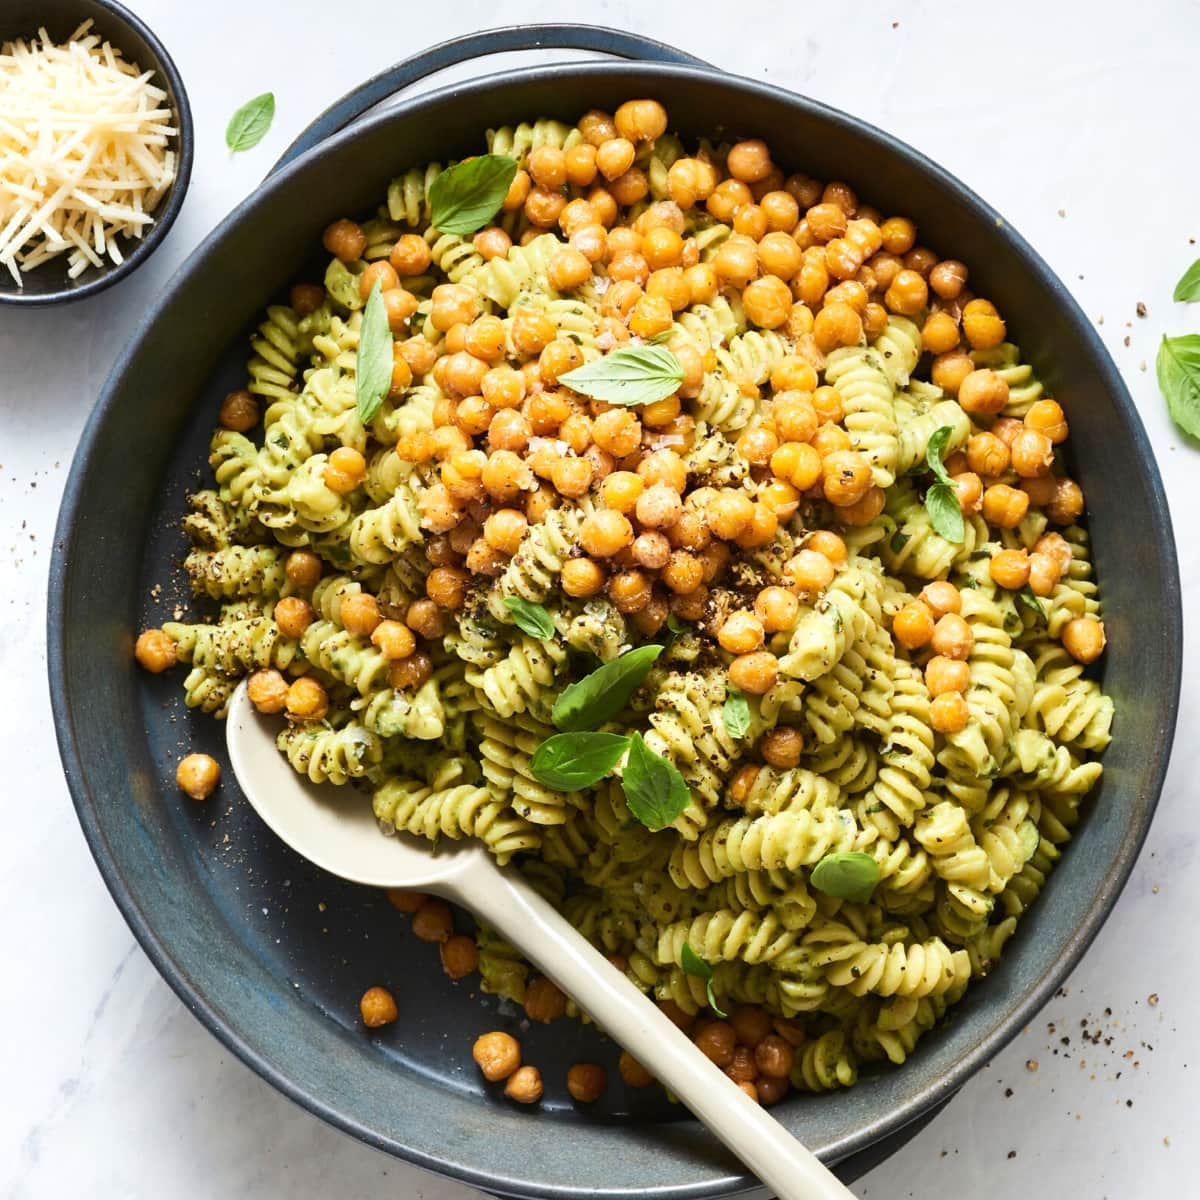 A black skillet filled with green pasta and chickpeas.